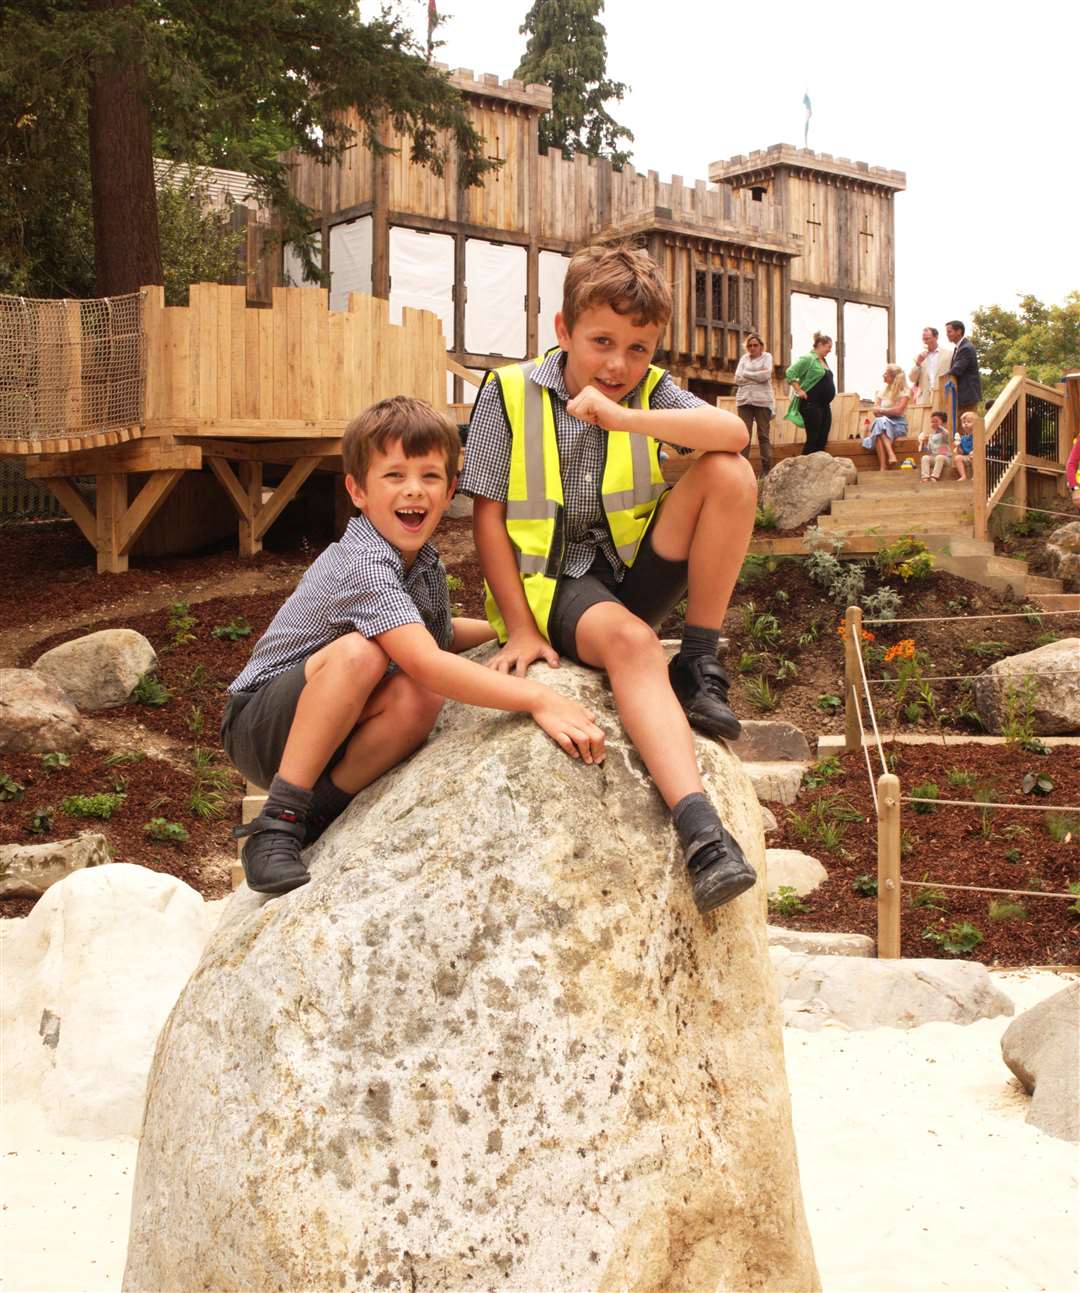 A new kids' play area has been opened at Hever Castle